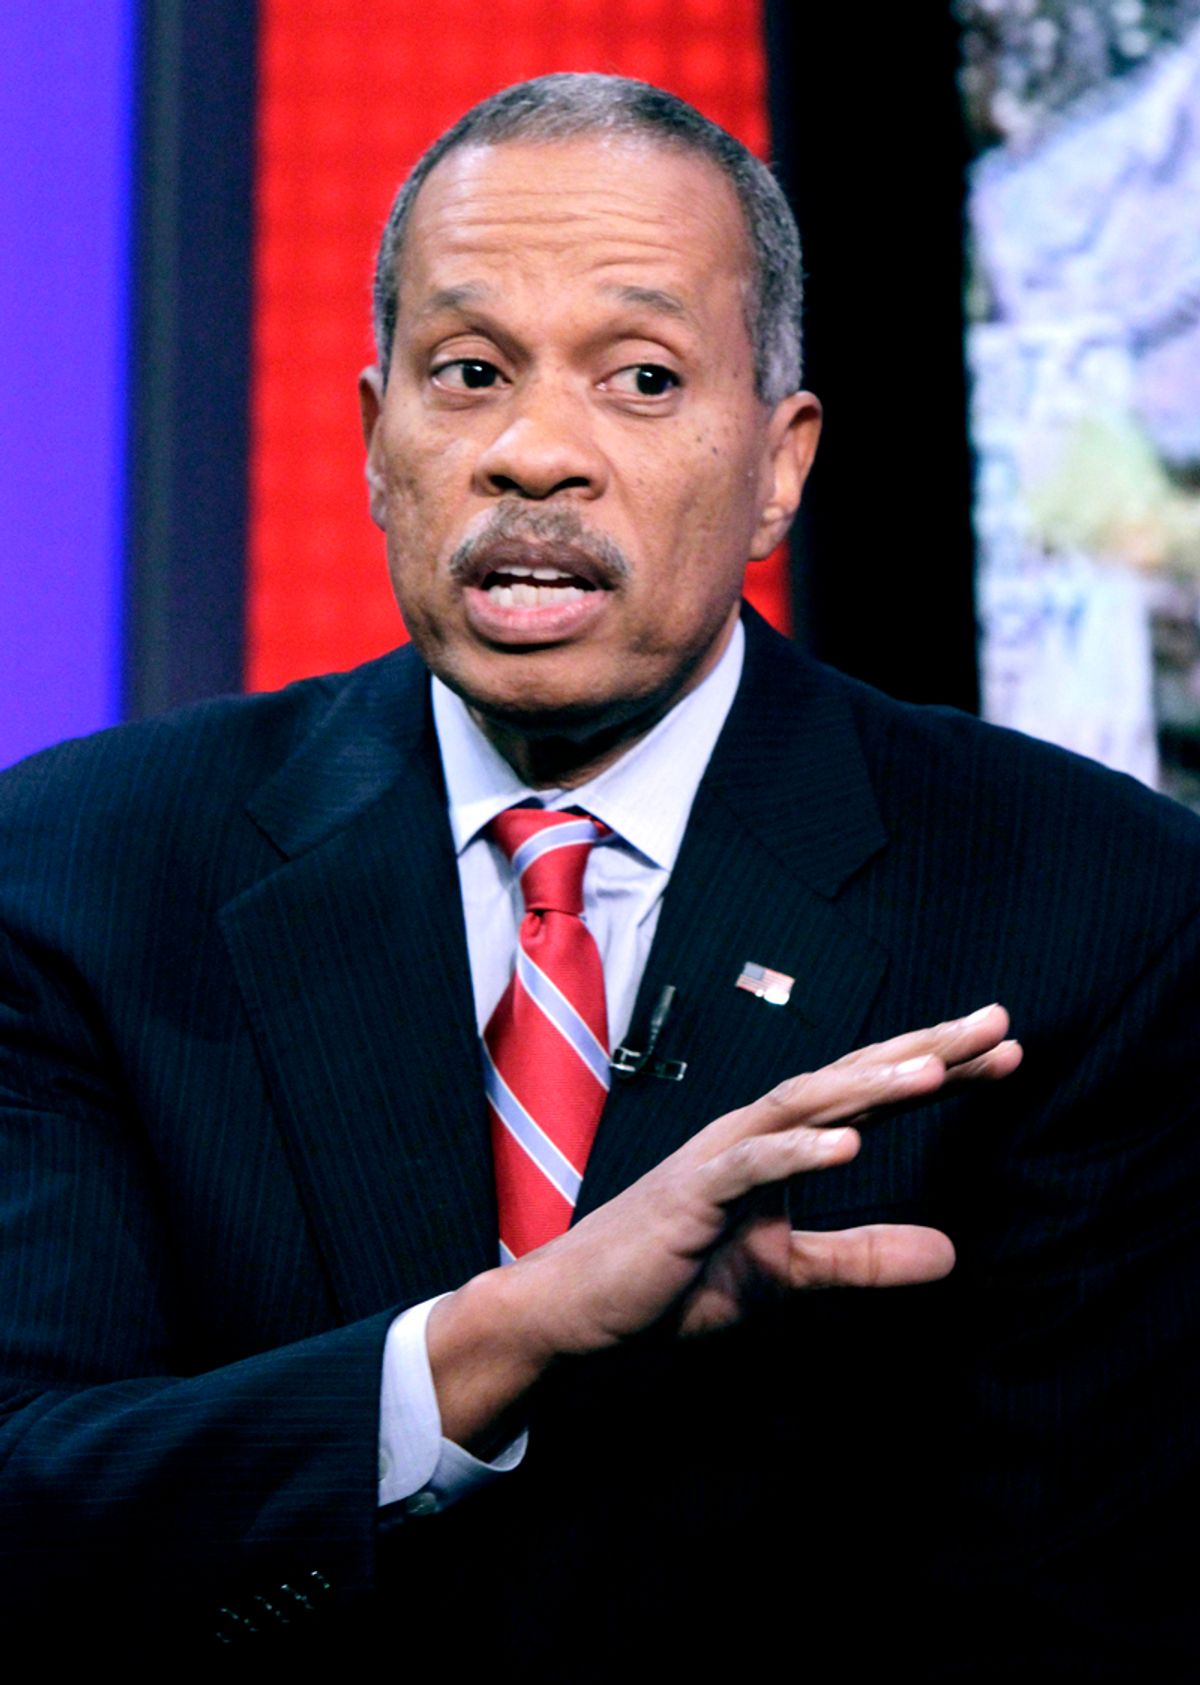 News analyst Juan Williams appears on the "Fox & friends" television program in New York, Thursday, Oct. 21, 2010. Williams, who has written extensively on race and civil rights in the U.S., has been fired by National Public Radio after comments he made about Muslims on Fox News Channel's "The O'Reilly Factor," on Monday. (AP Photo/Richard Drew)   (Richard Drew)